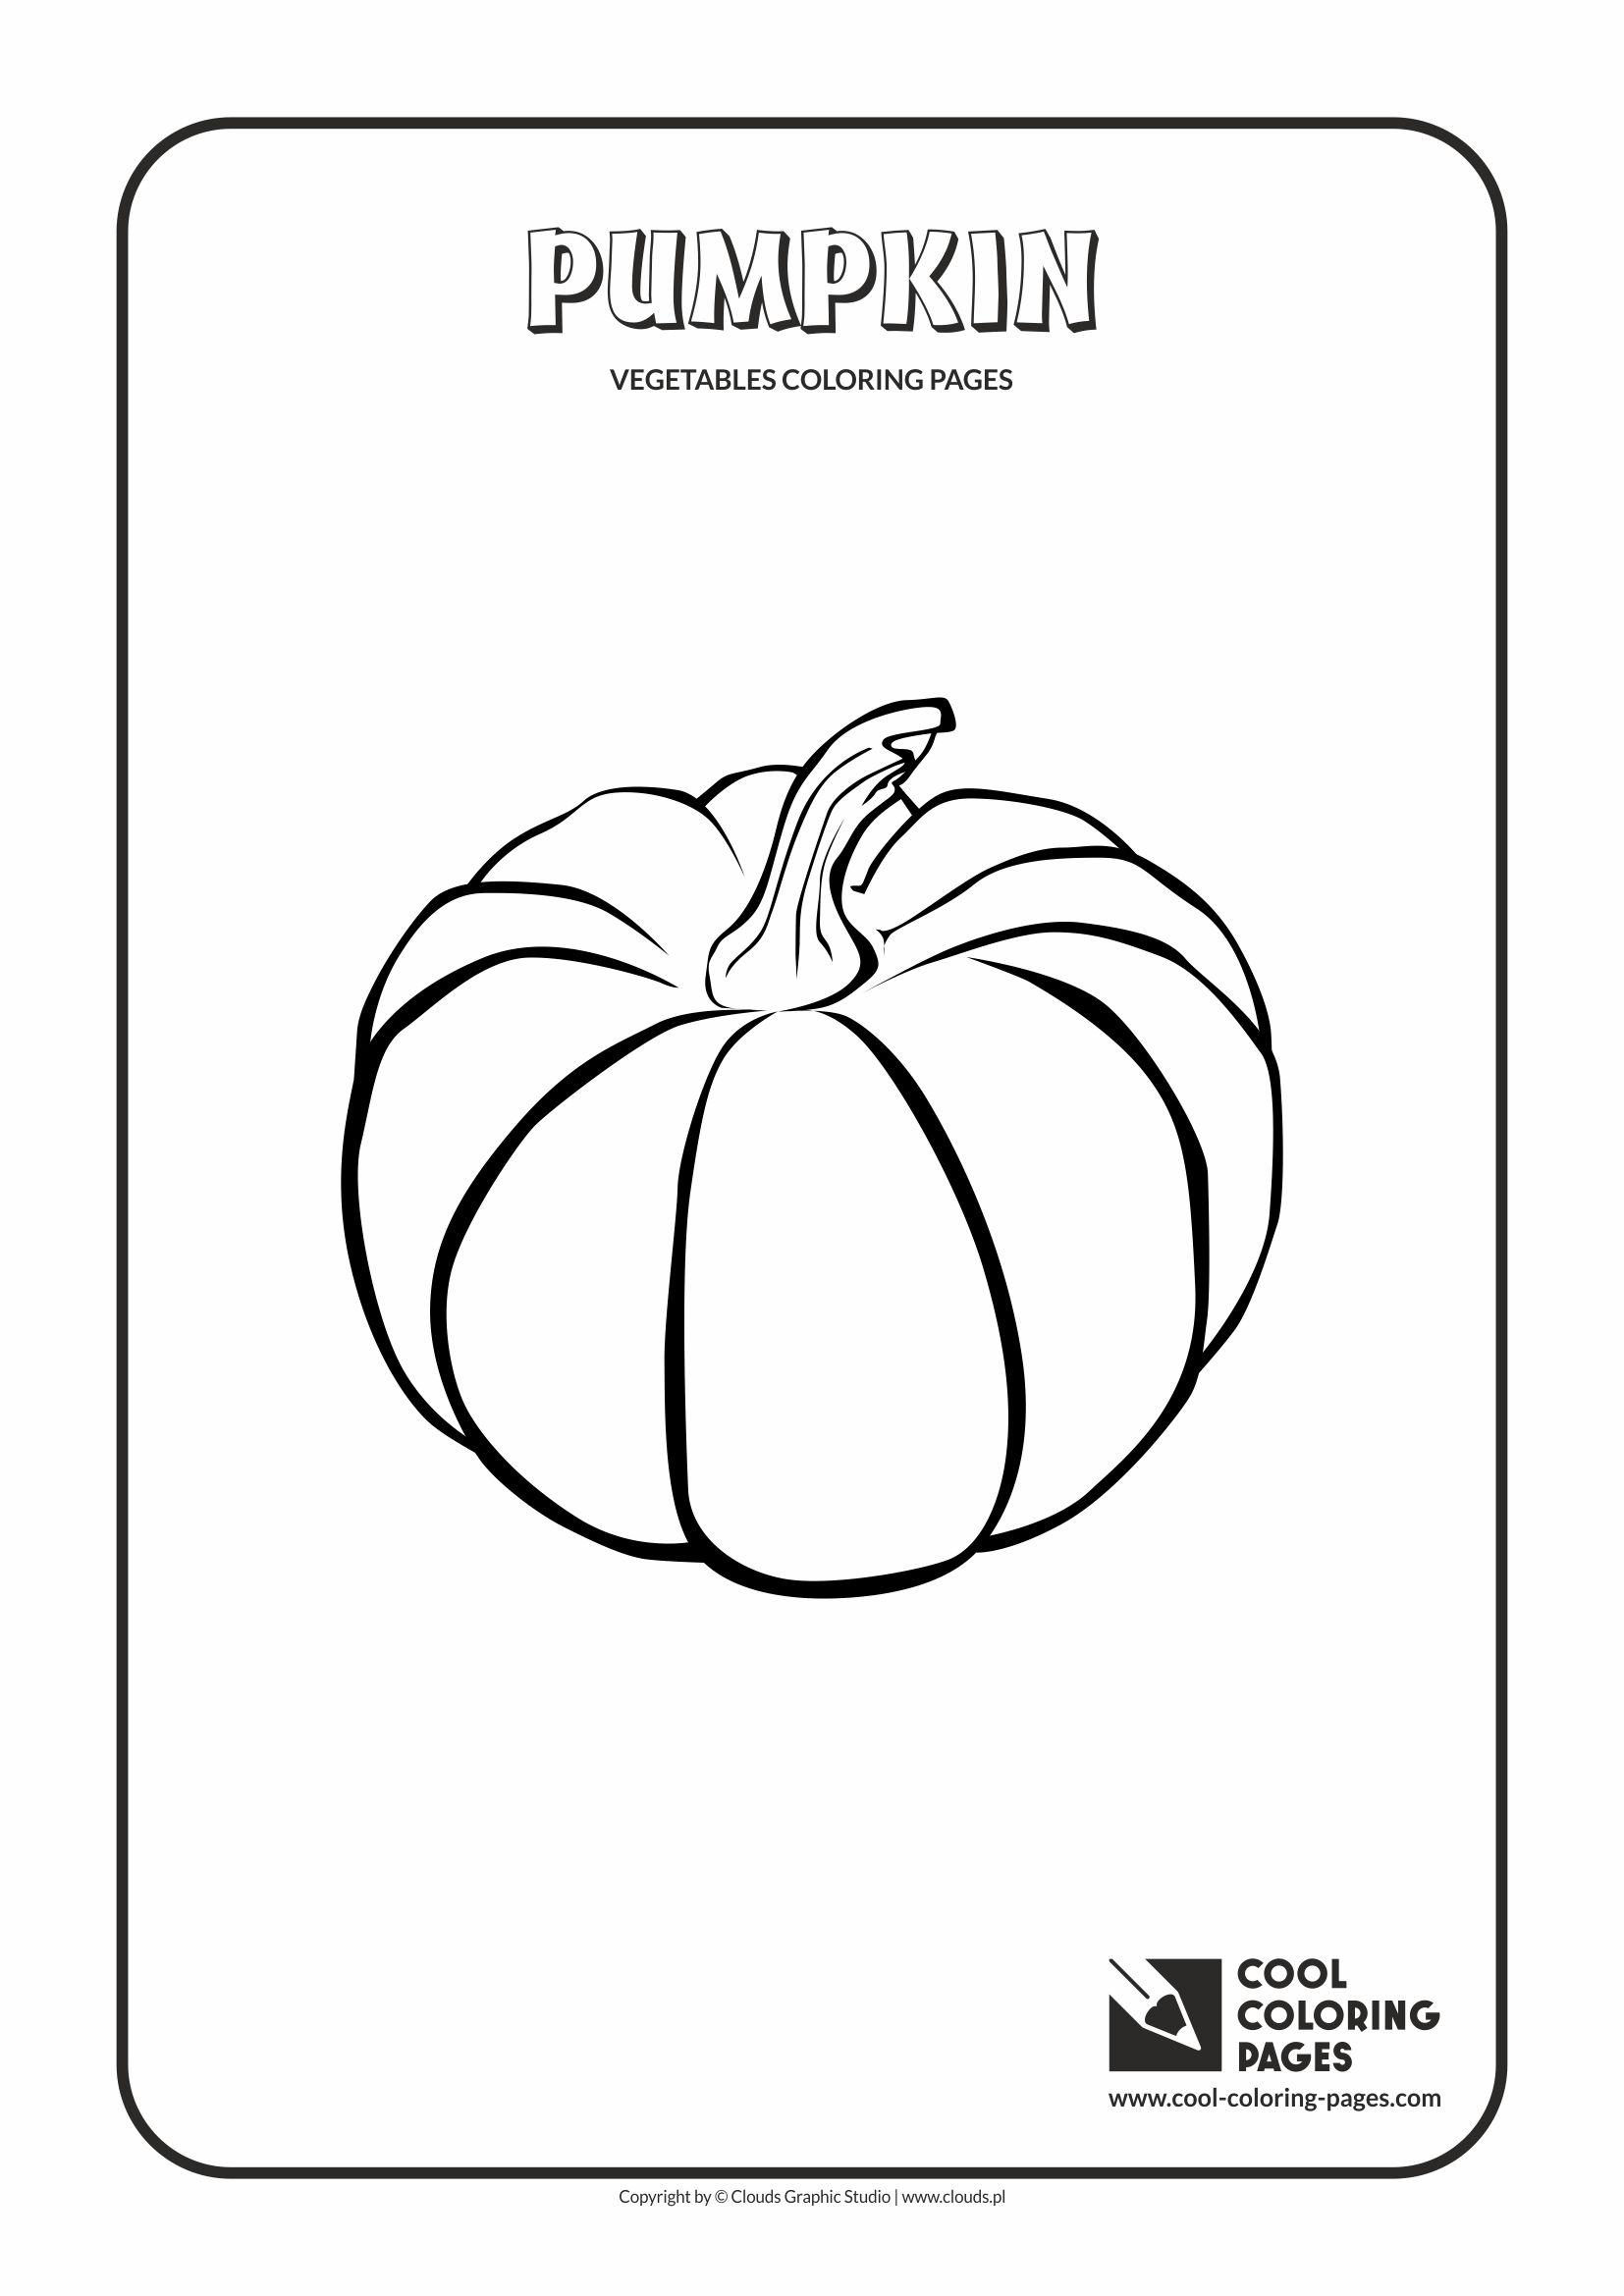 Download Cool Coloring Pages Vegetables coloring pages - Cool Coloring Pages | Free educational coloring ...